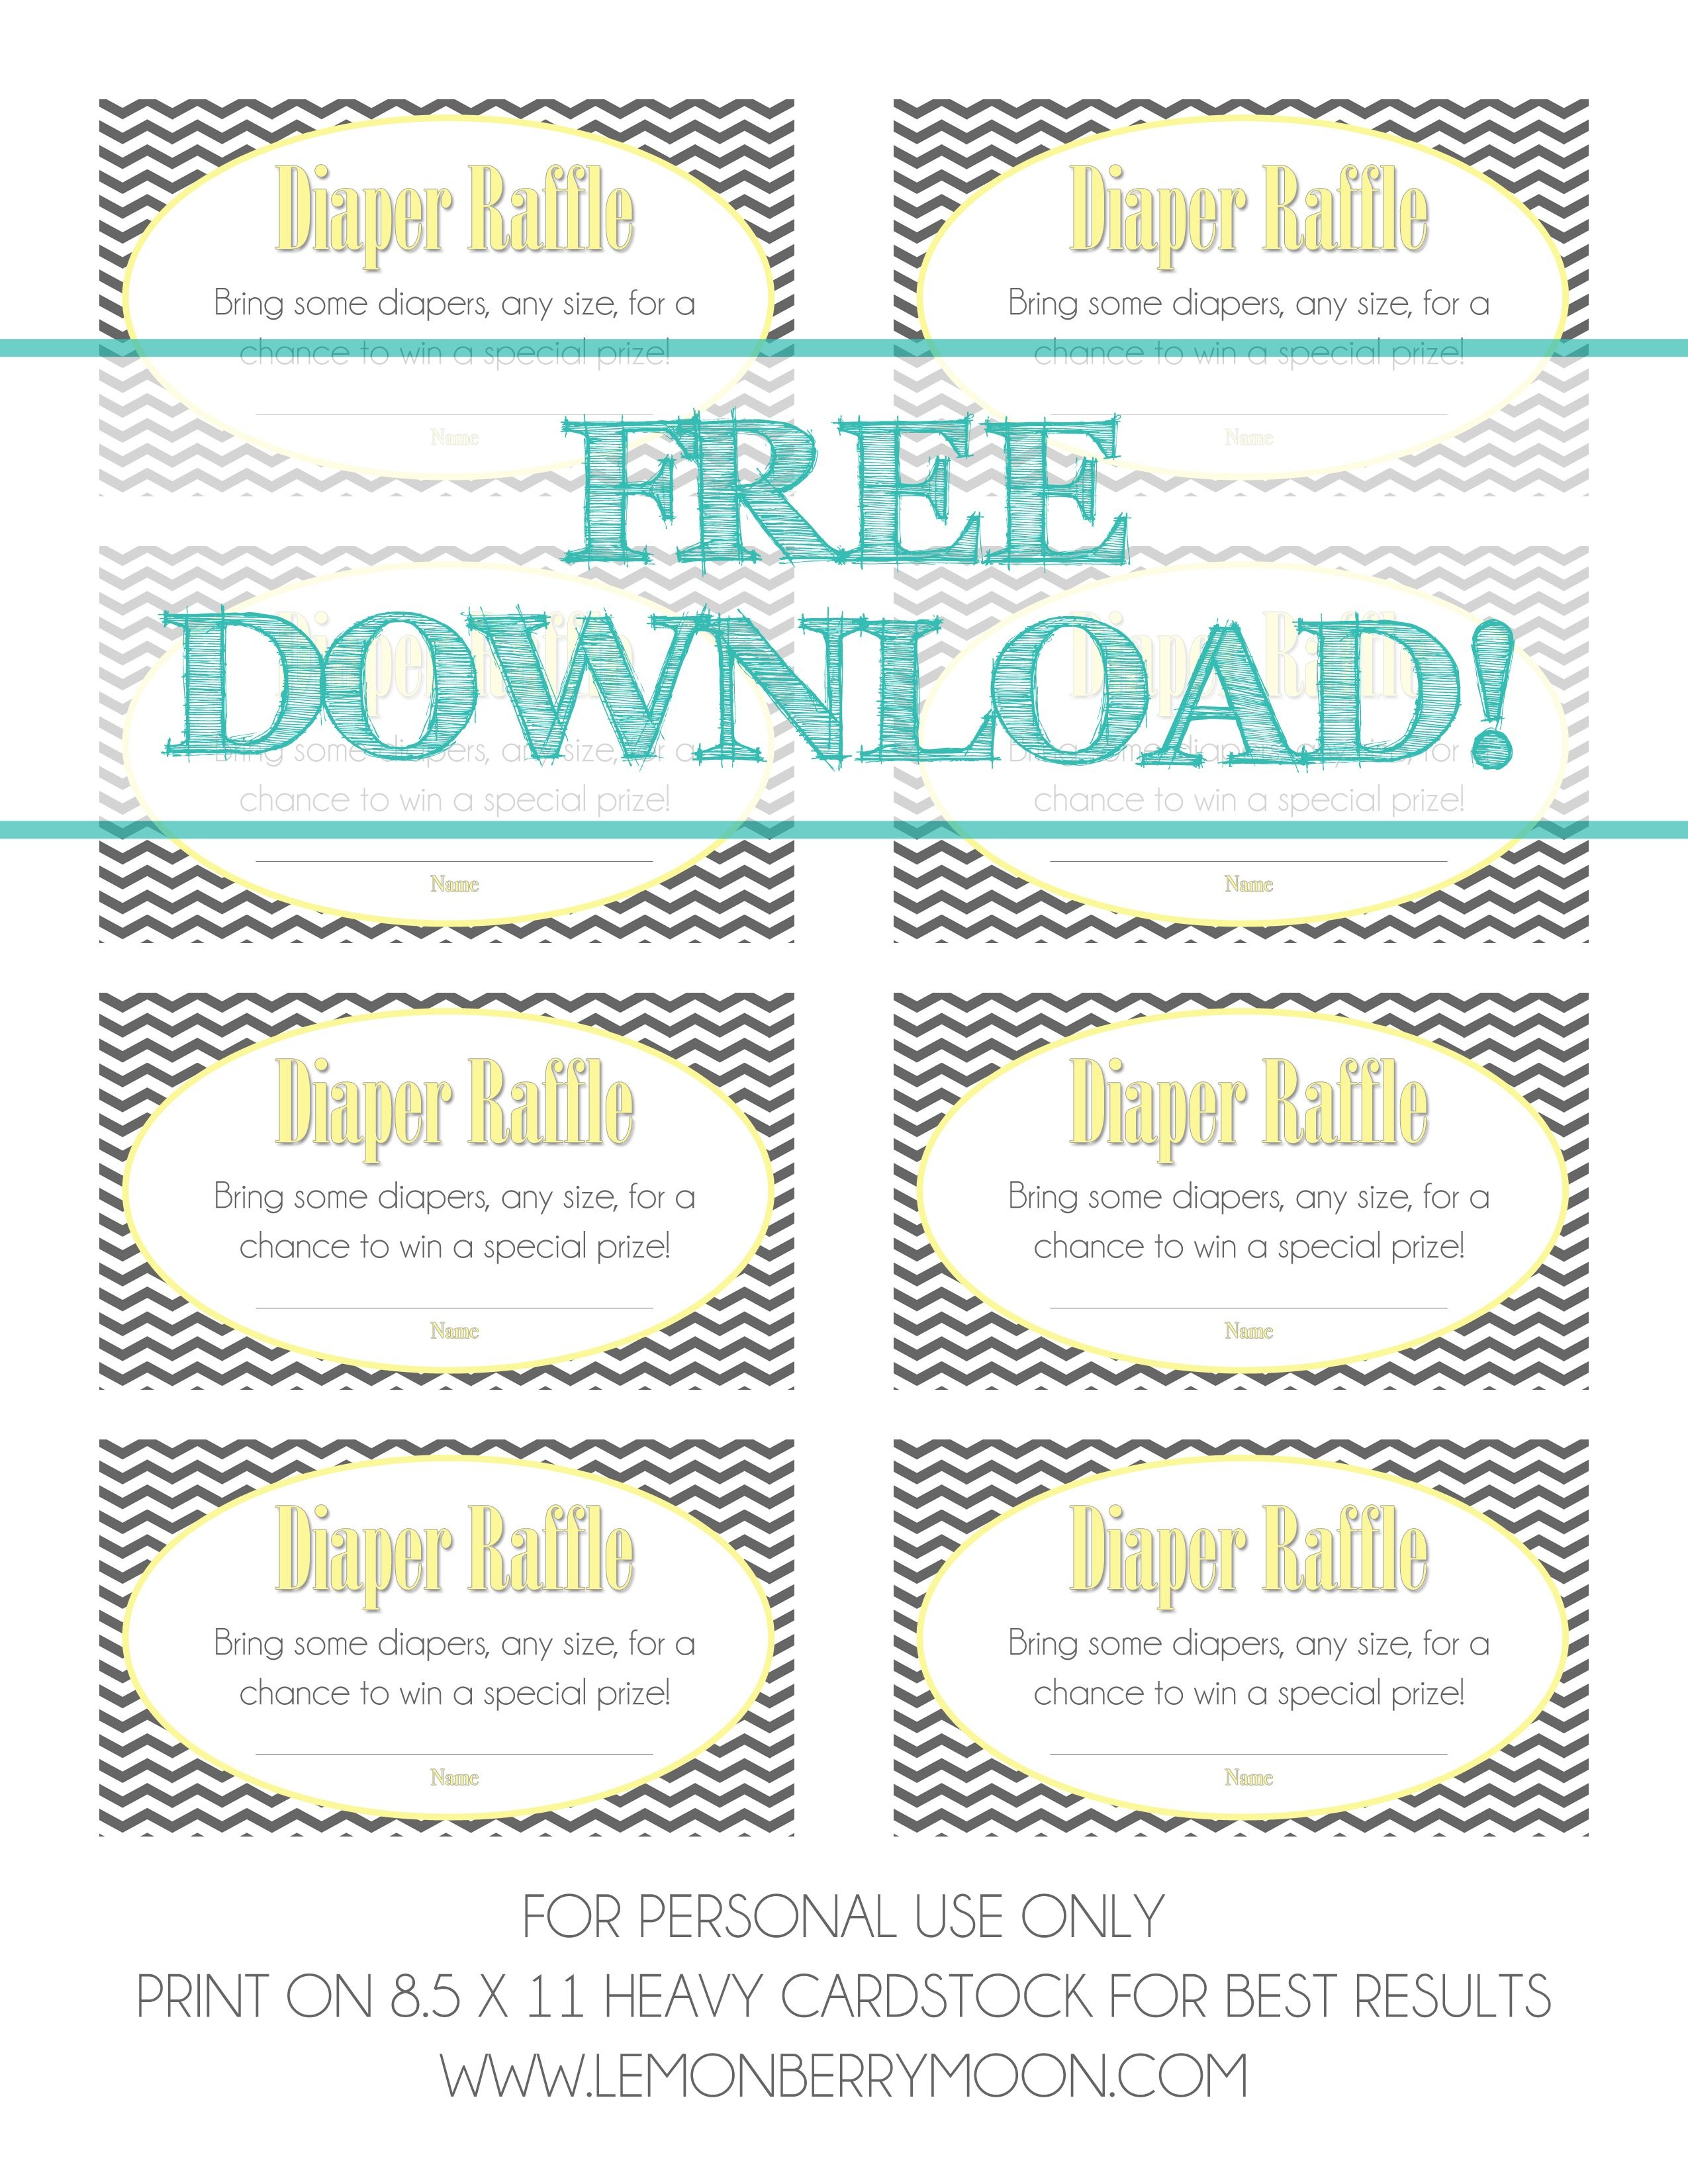 Free Download - Baby Diaper Raffle Template | Baaby Shower | Baby - Free Printable Diaper Raffle Ticket Template